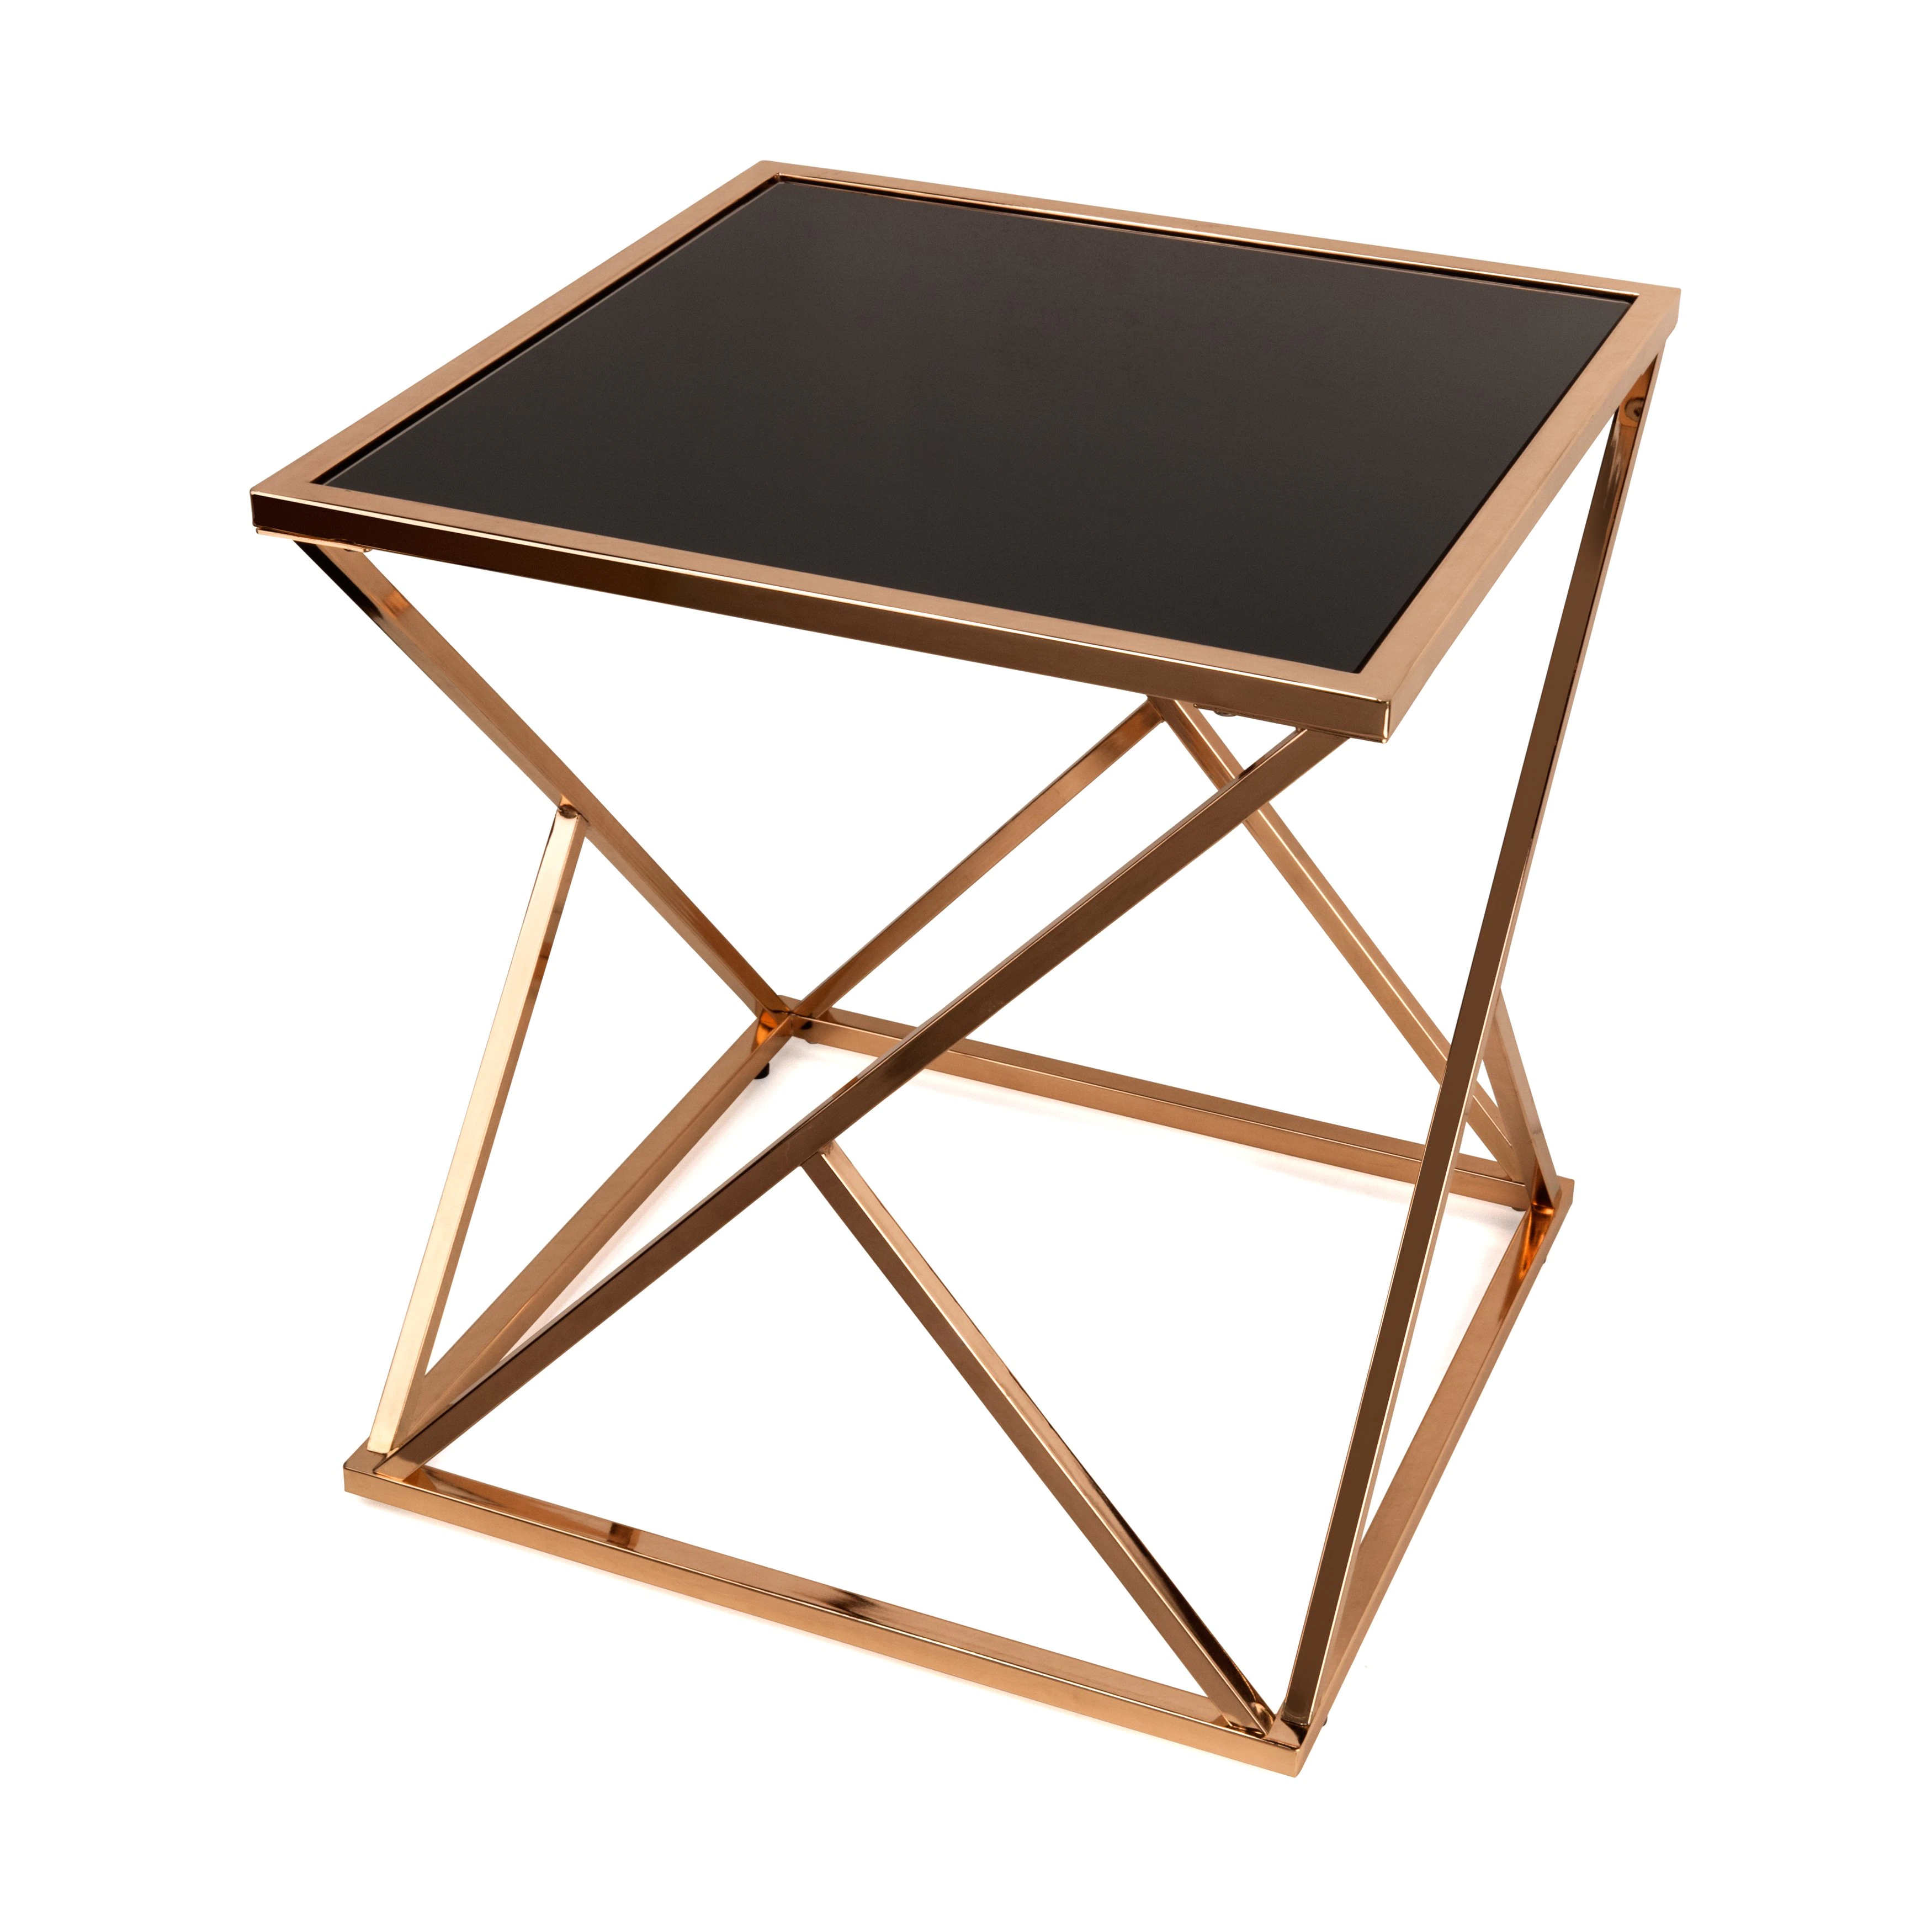 danya square geodesic rose gold end table with black glasstop glass top tables free shipping today oblong sauder dakota pass round lamp red side modern coffee designs resin wicker